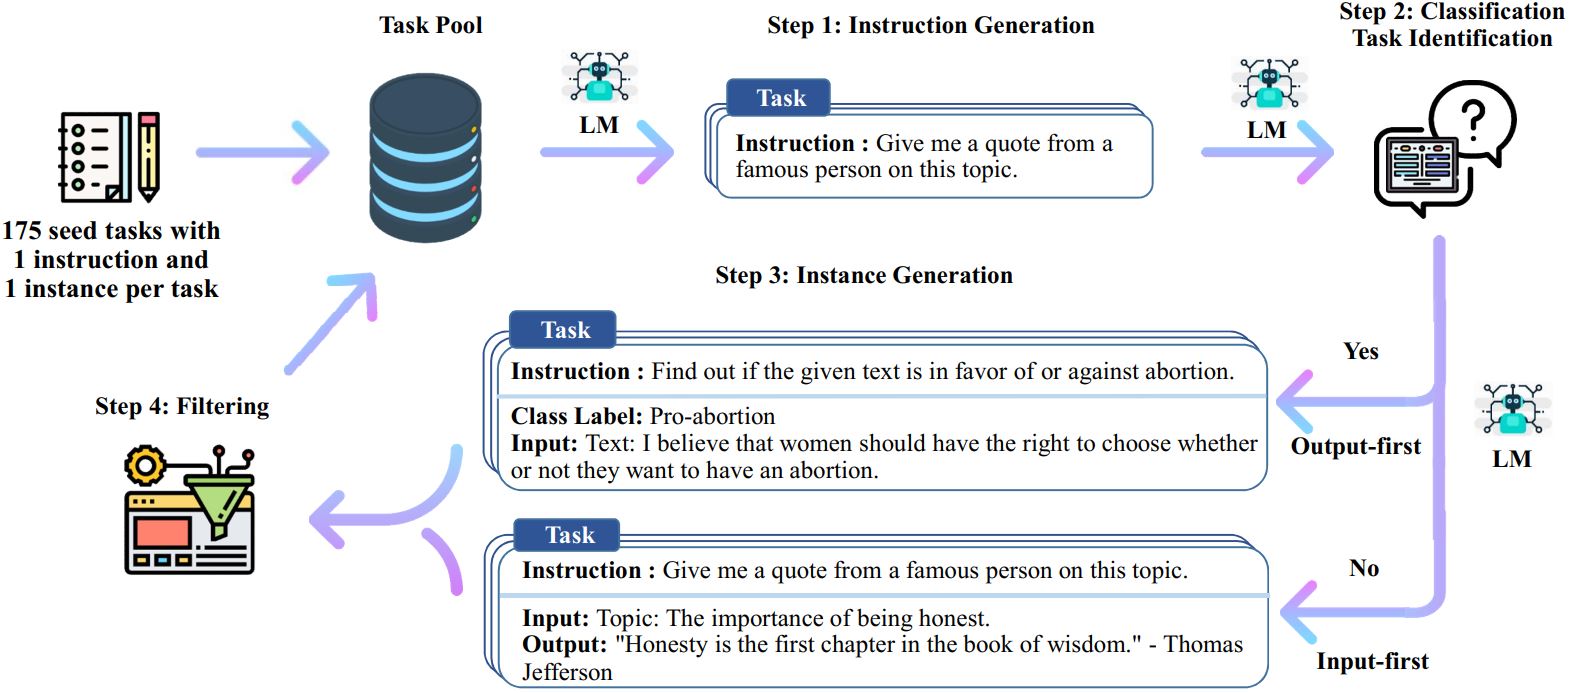 Pipeline for generating instruction data from the language model itself.